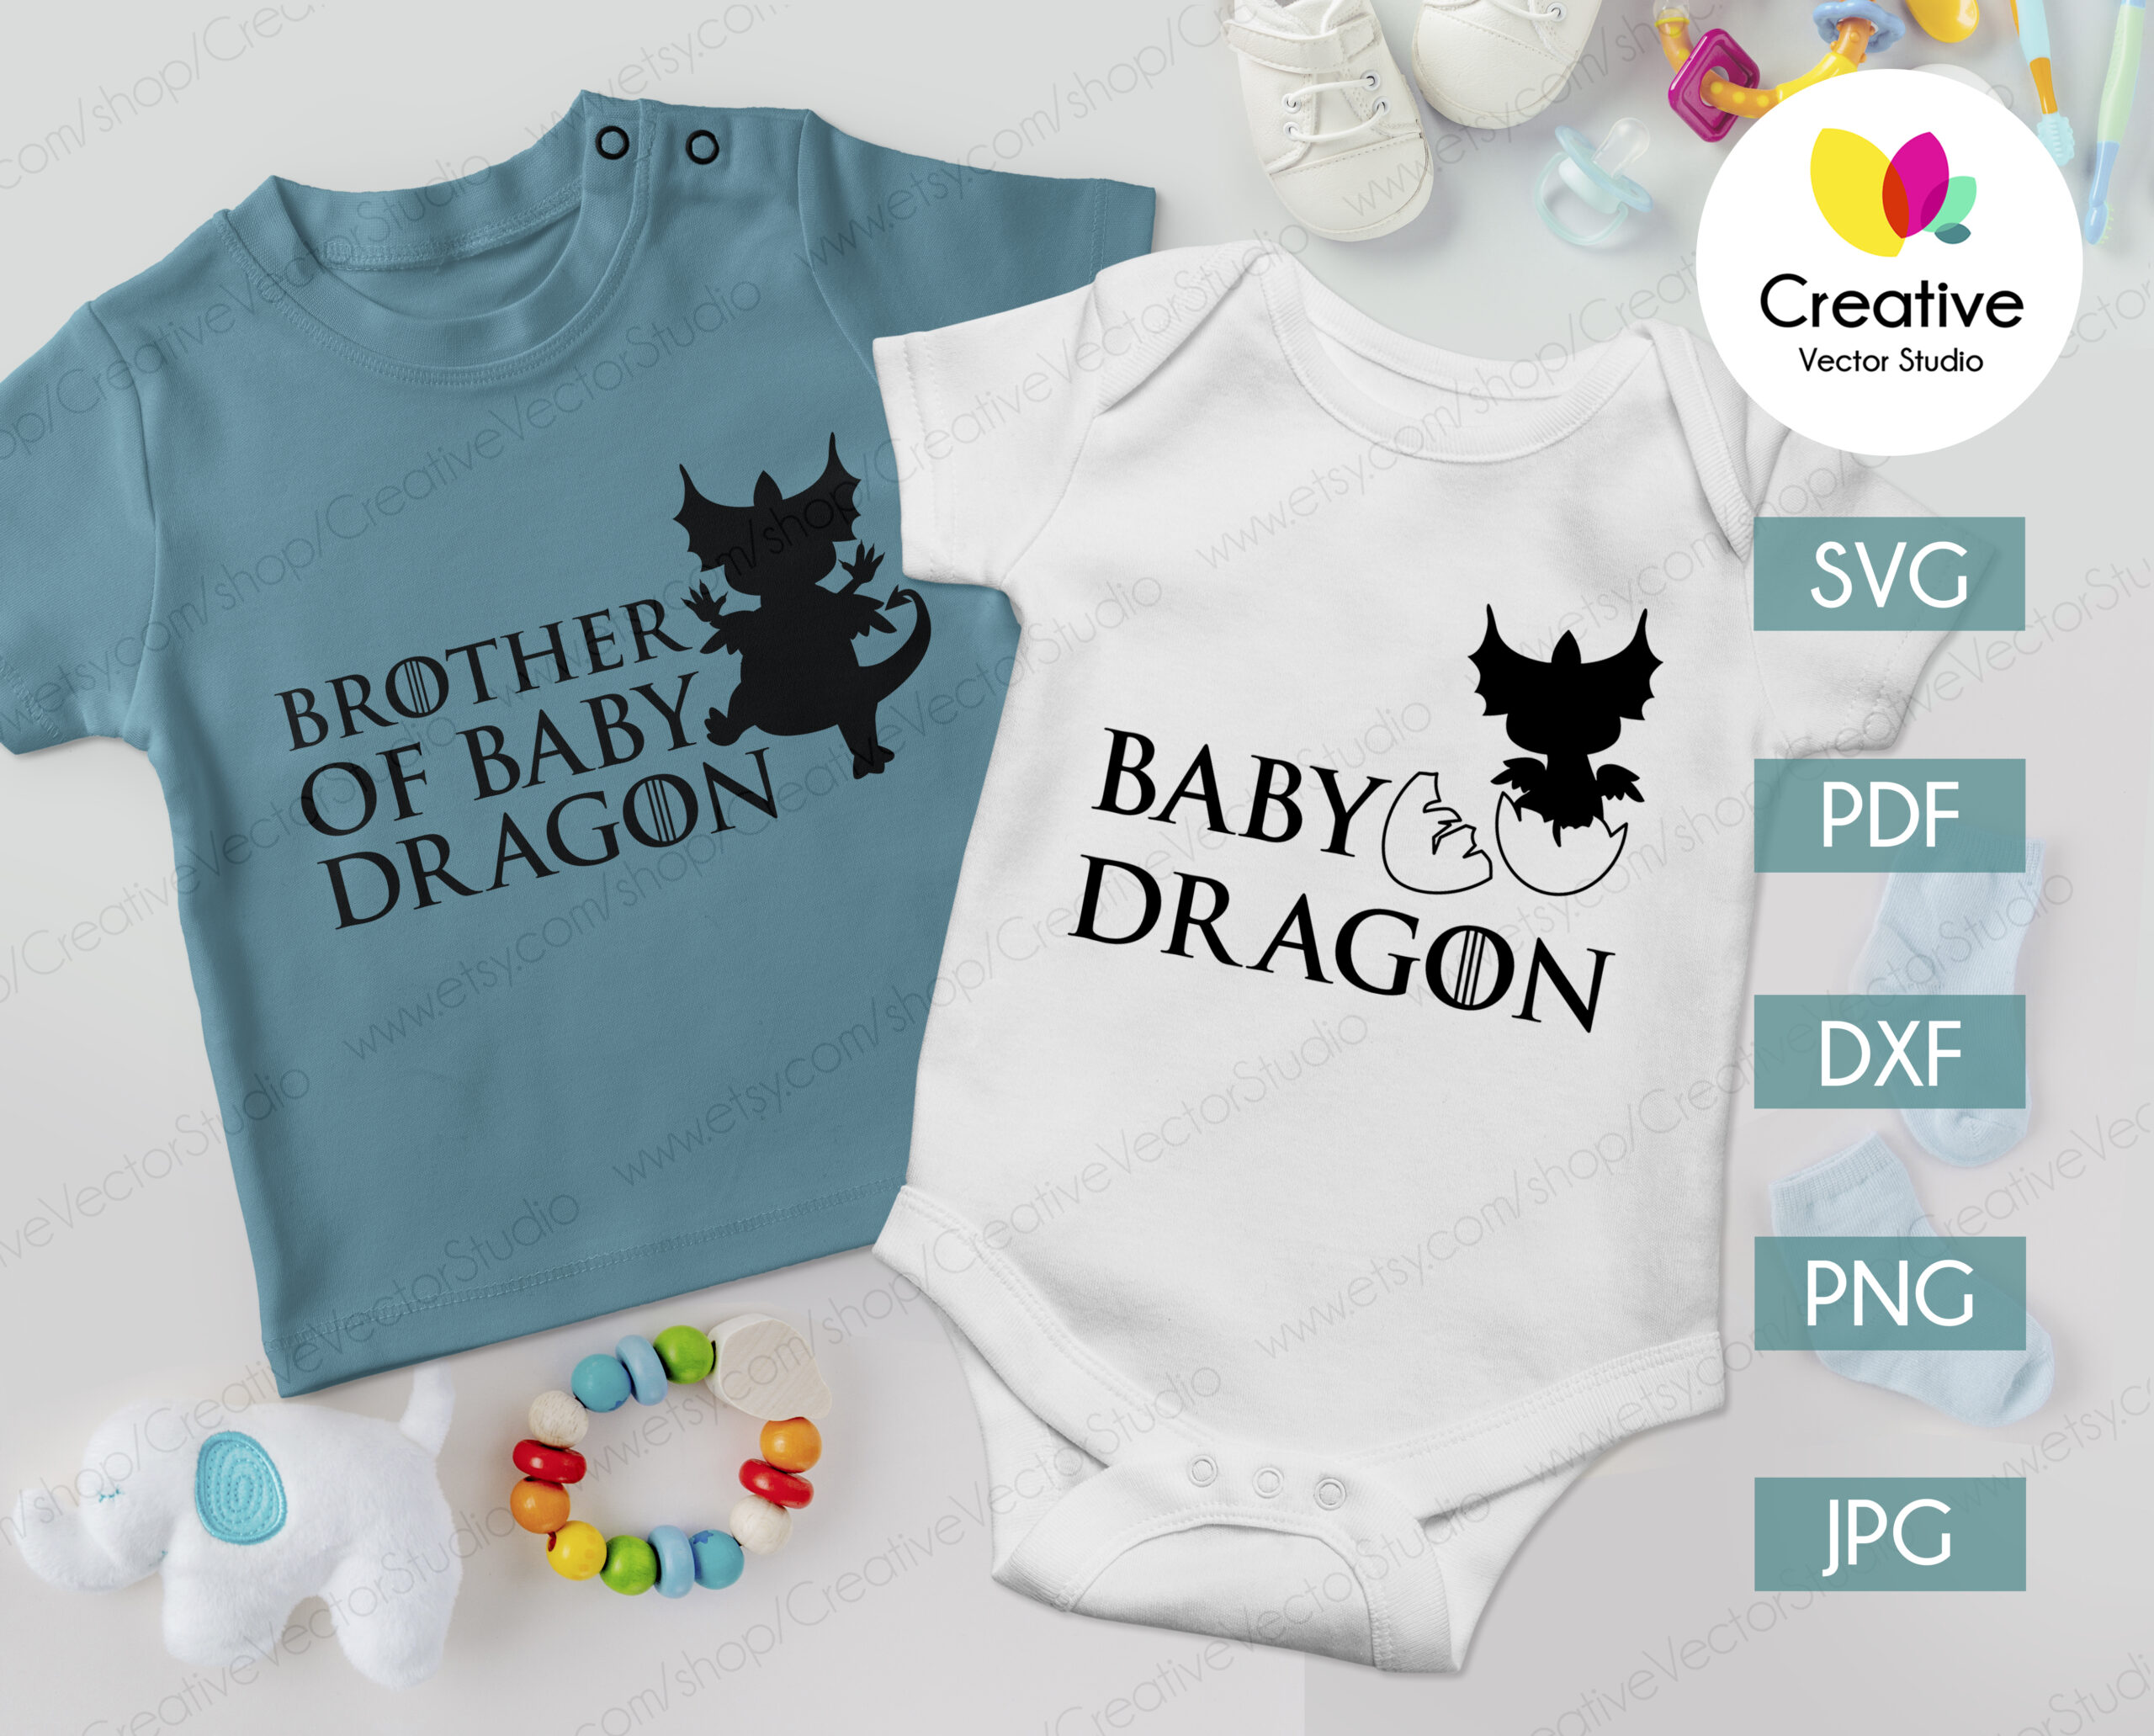 Download Game Of Thrones Svg Family Of Dragons Creative Vector Studio